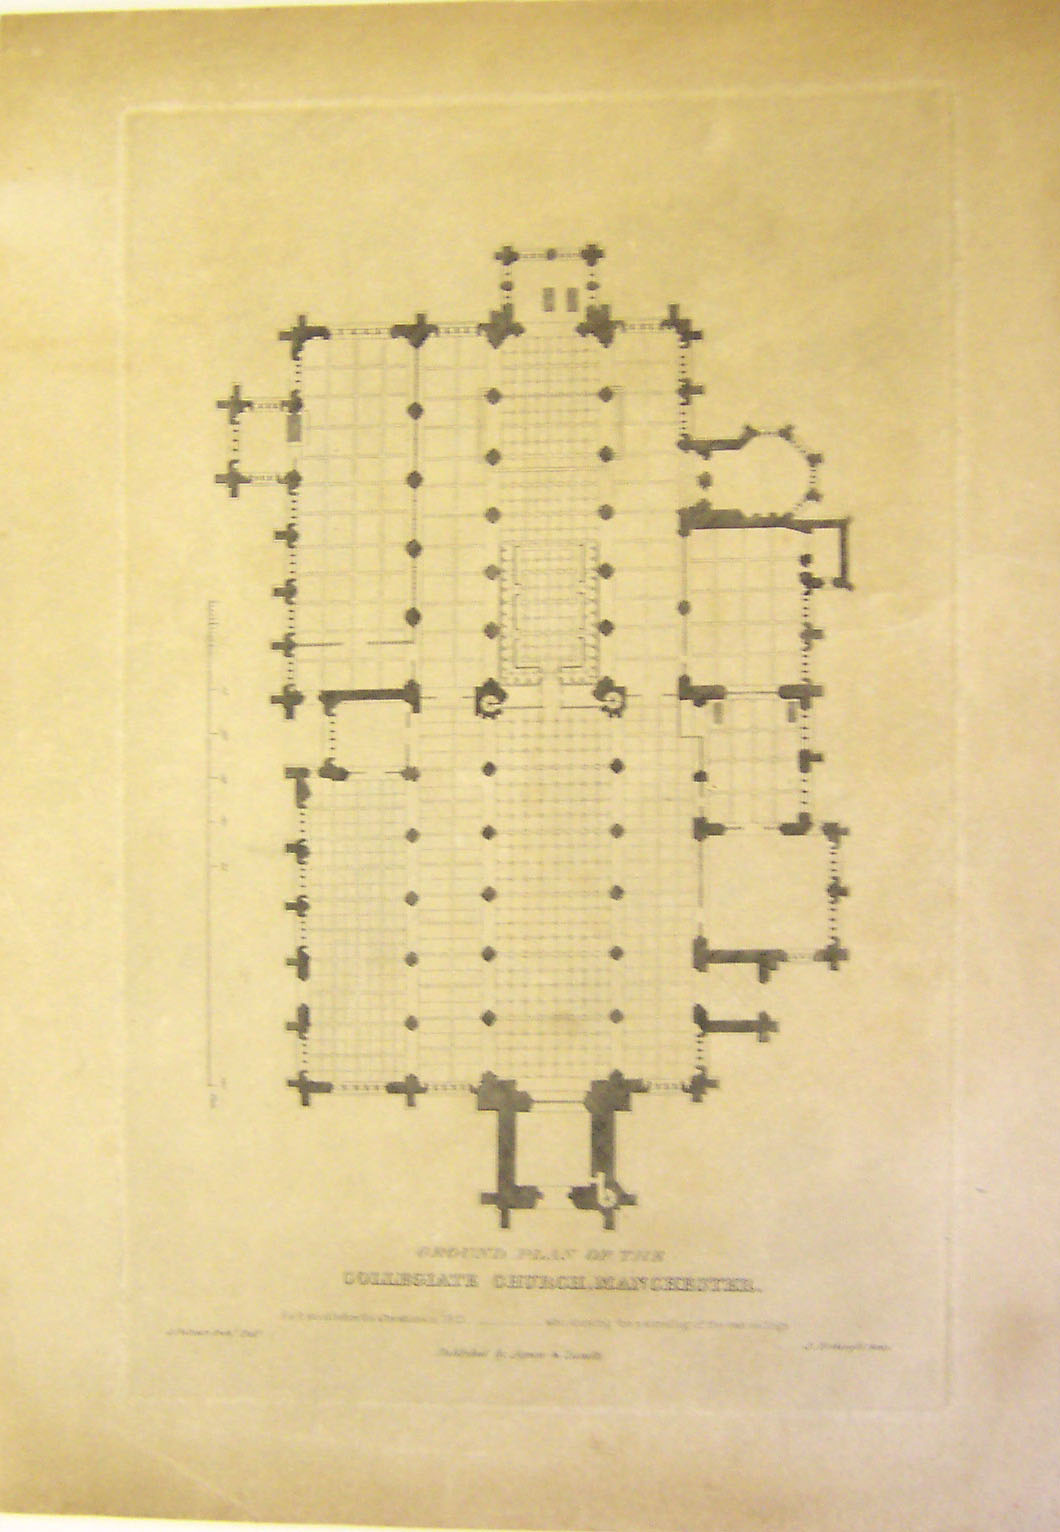 Ground Plan of the Collegiate Church, Manchester